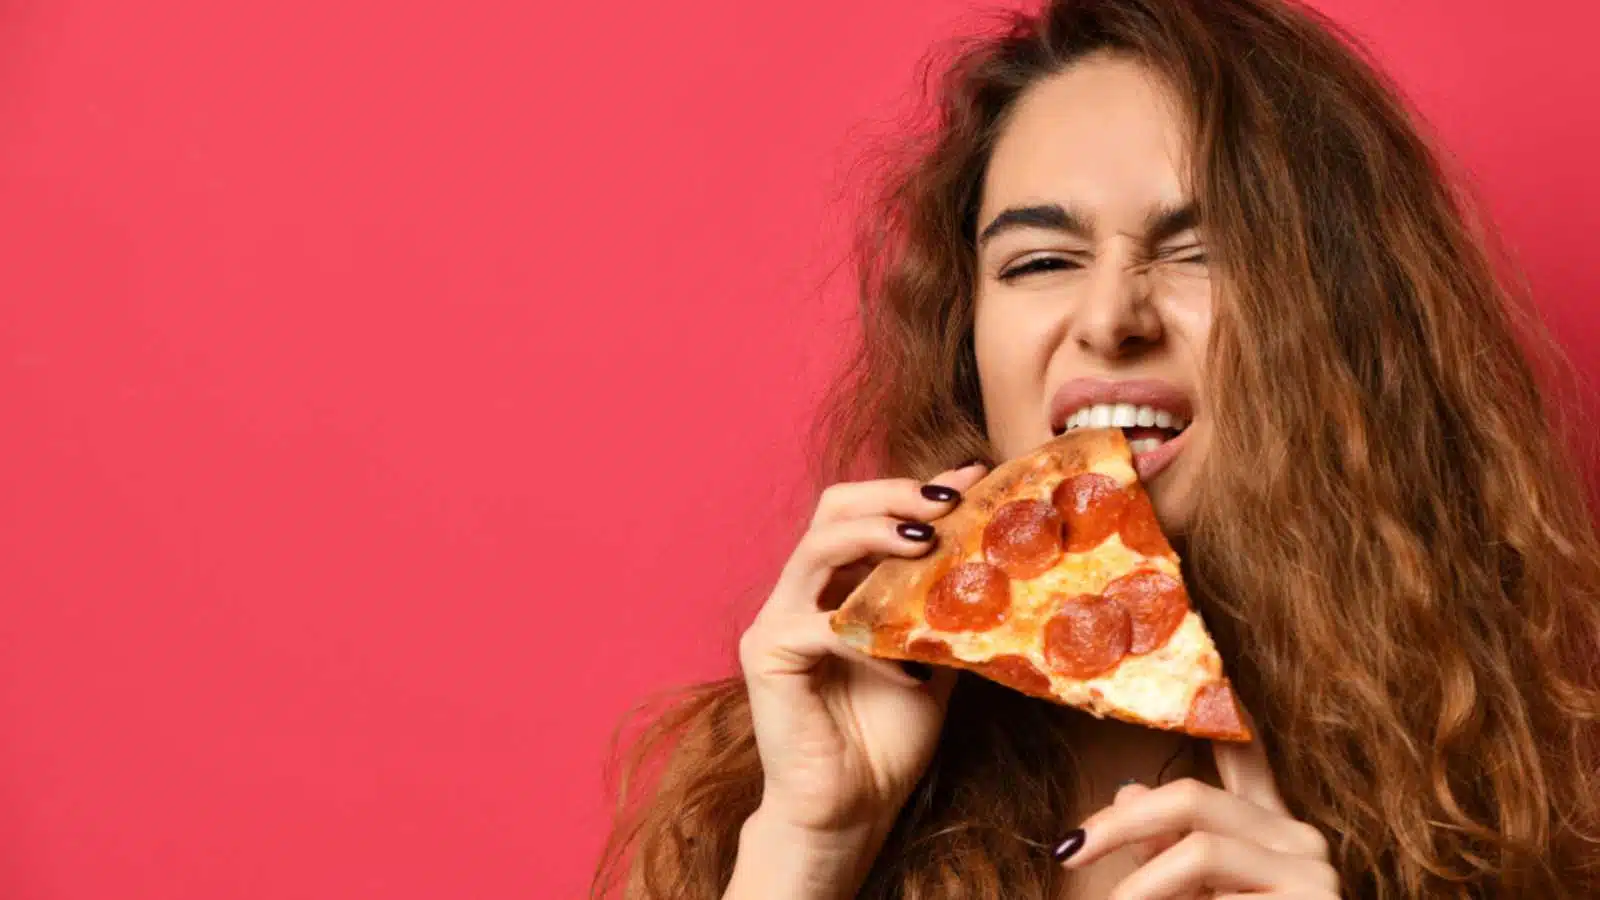 Woman eating Pizza